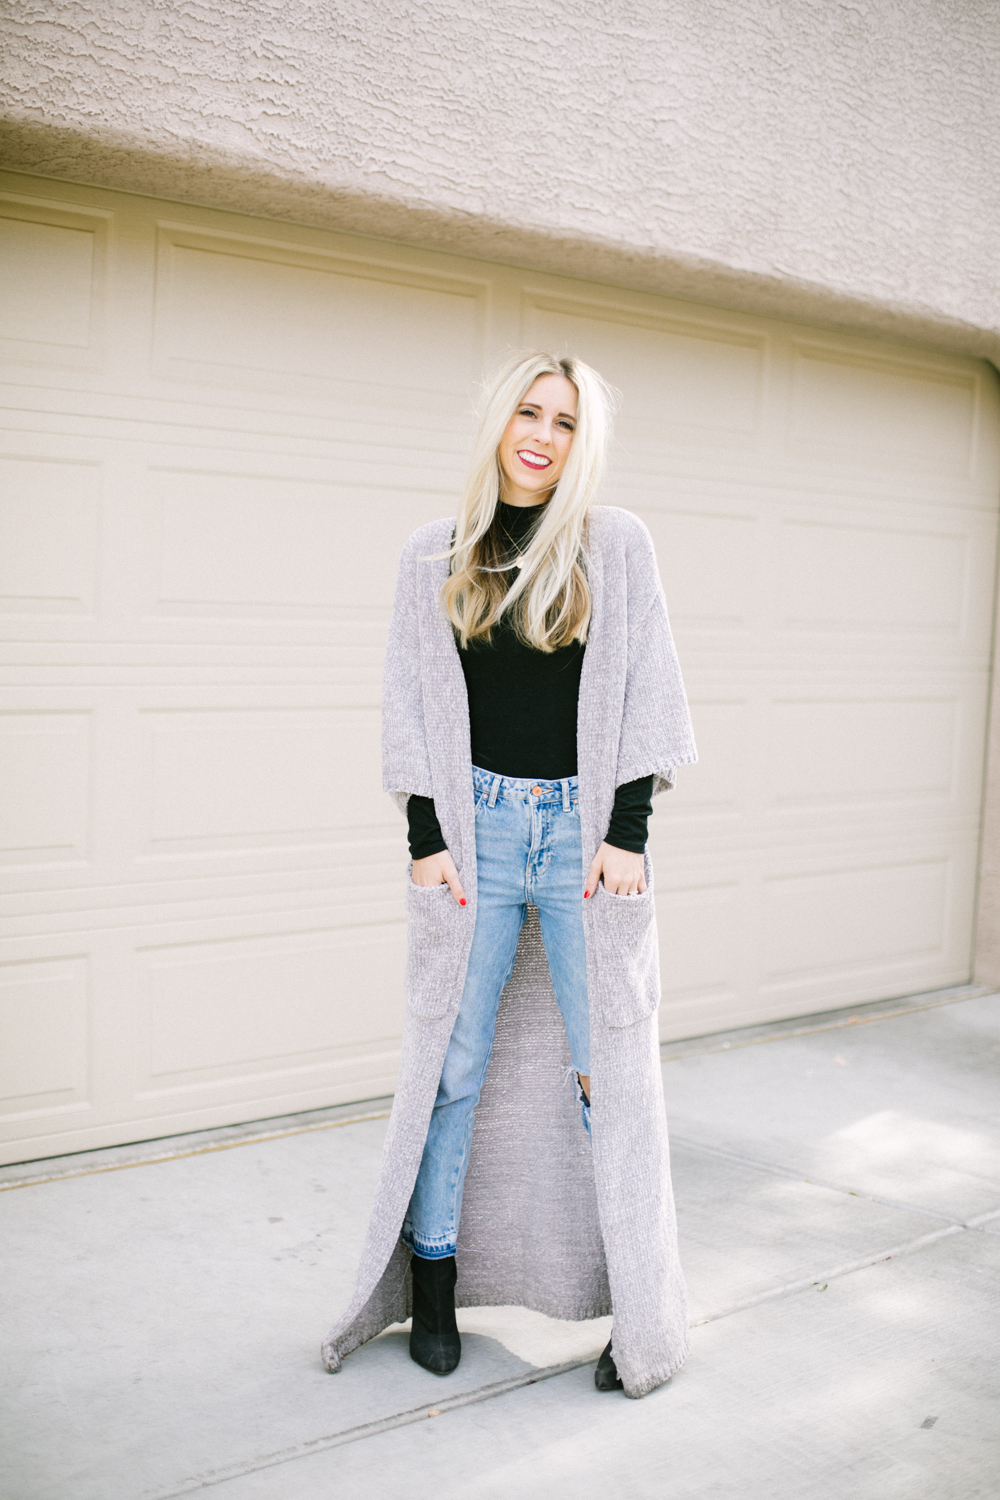 Holiday Season by Las Vegas style bloggers Life of a Sister